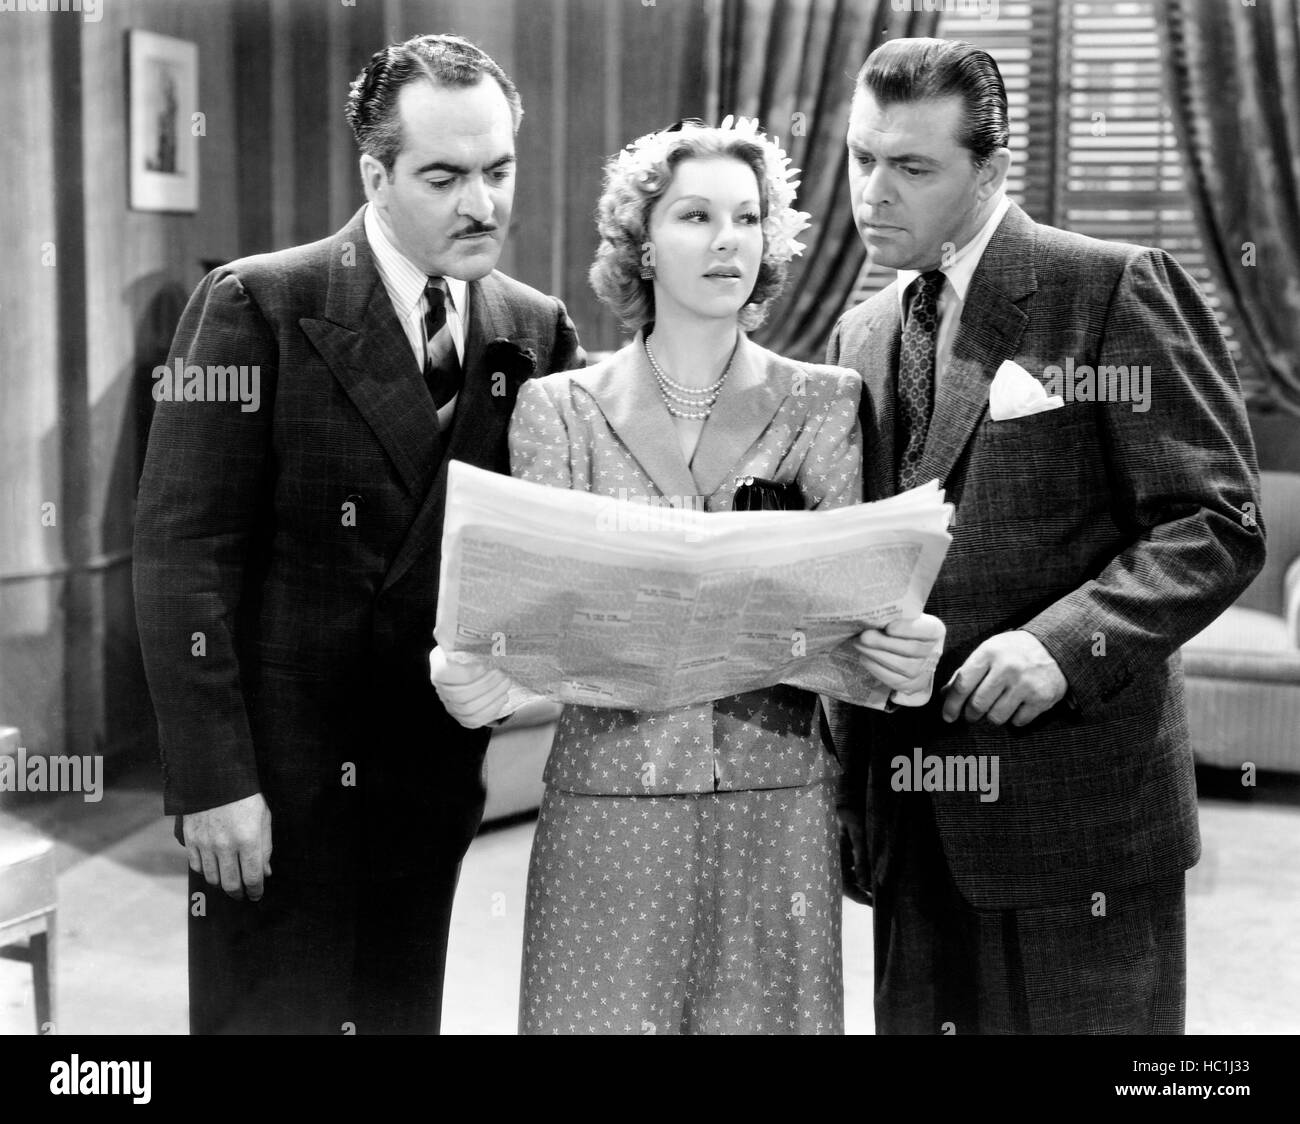 A NIGHT FOR CRIME, from left, Forrest Taylor, Glenda Farrell, Lyle ...